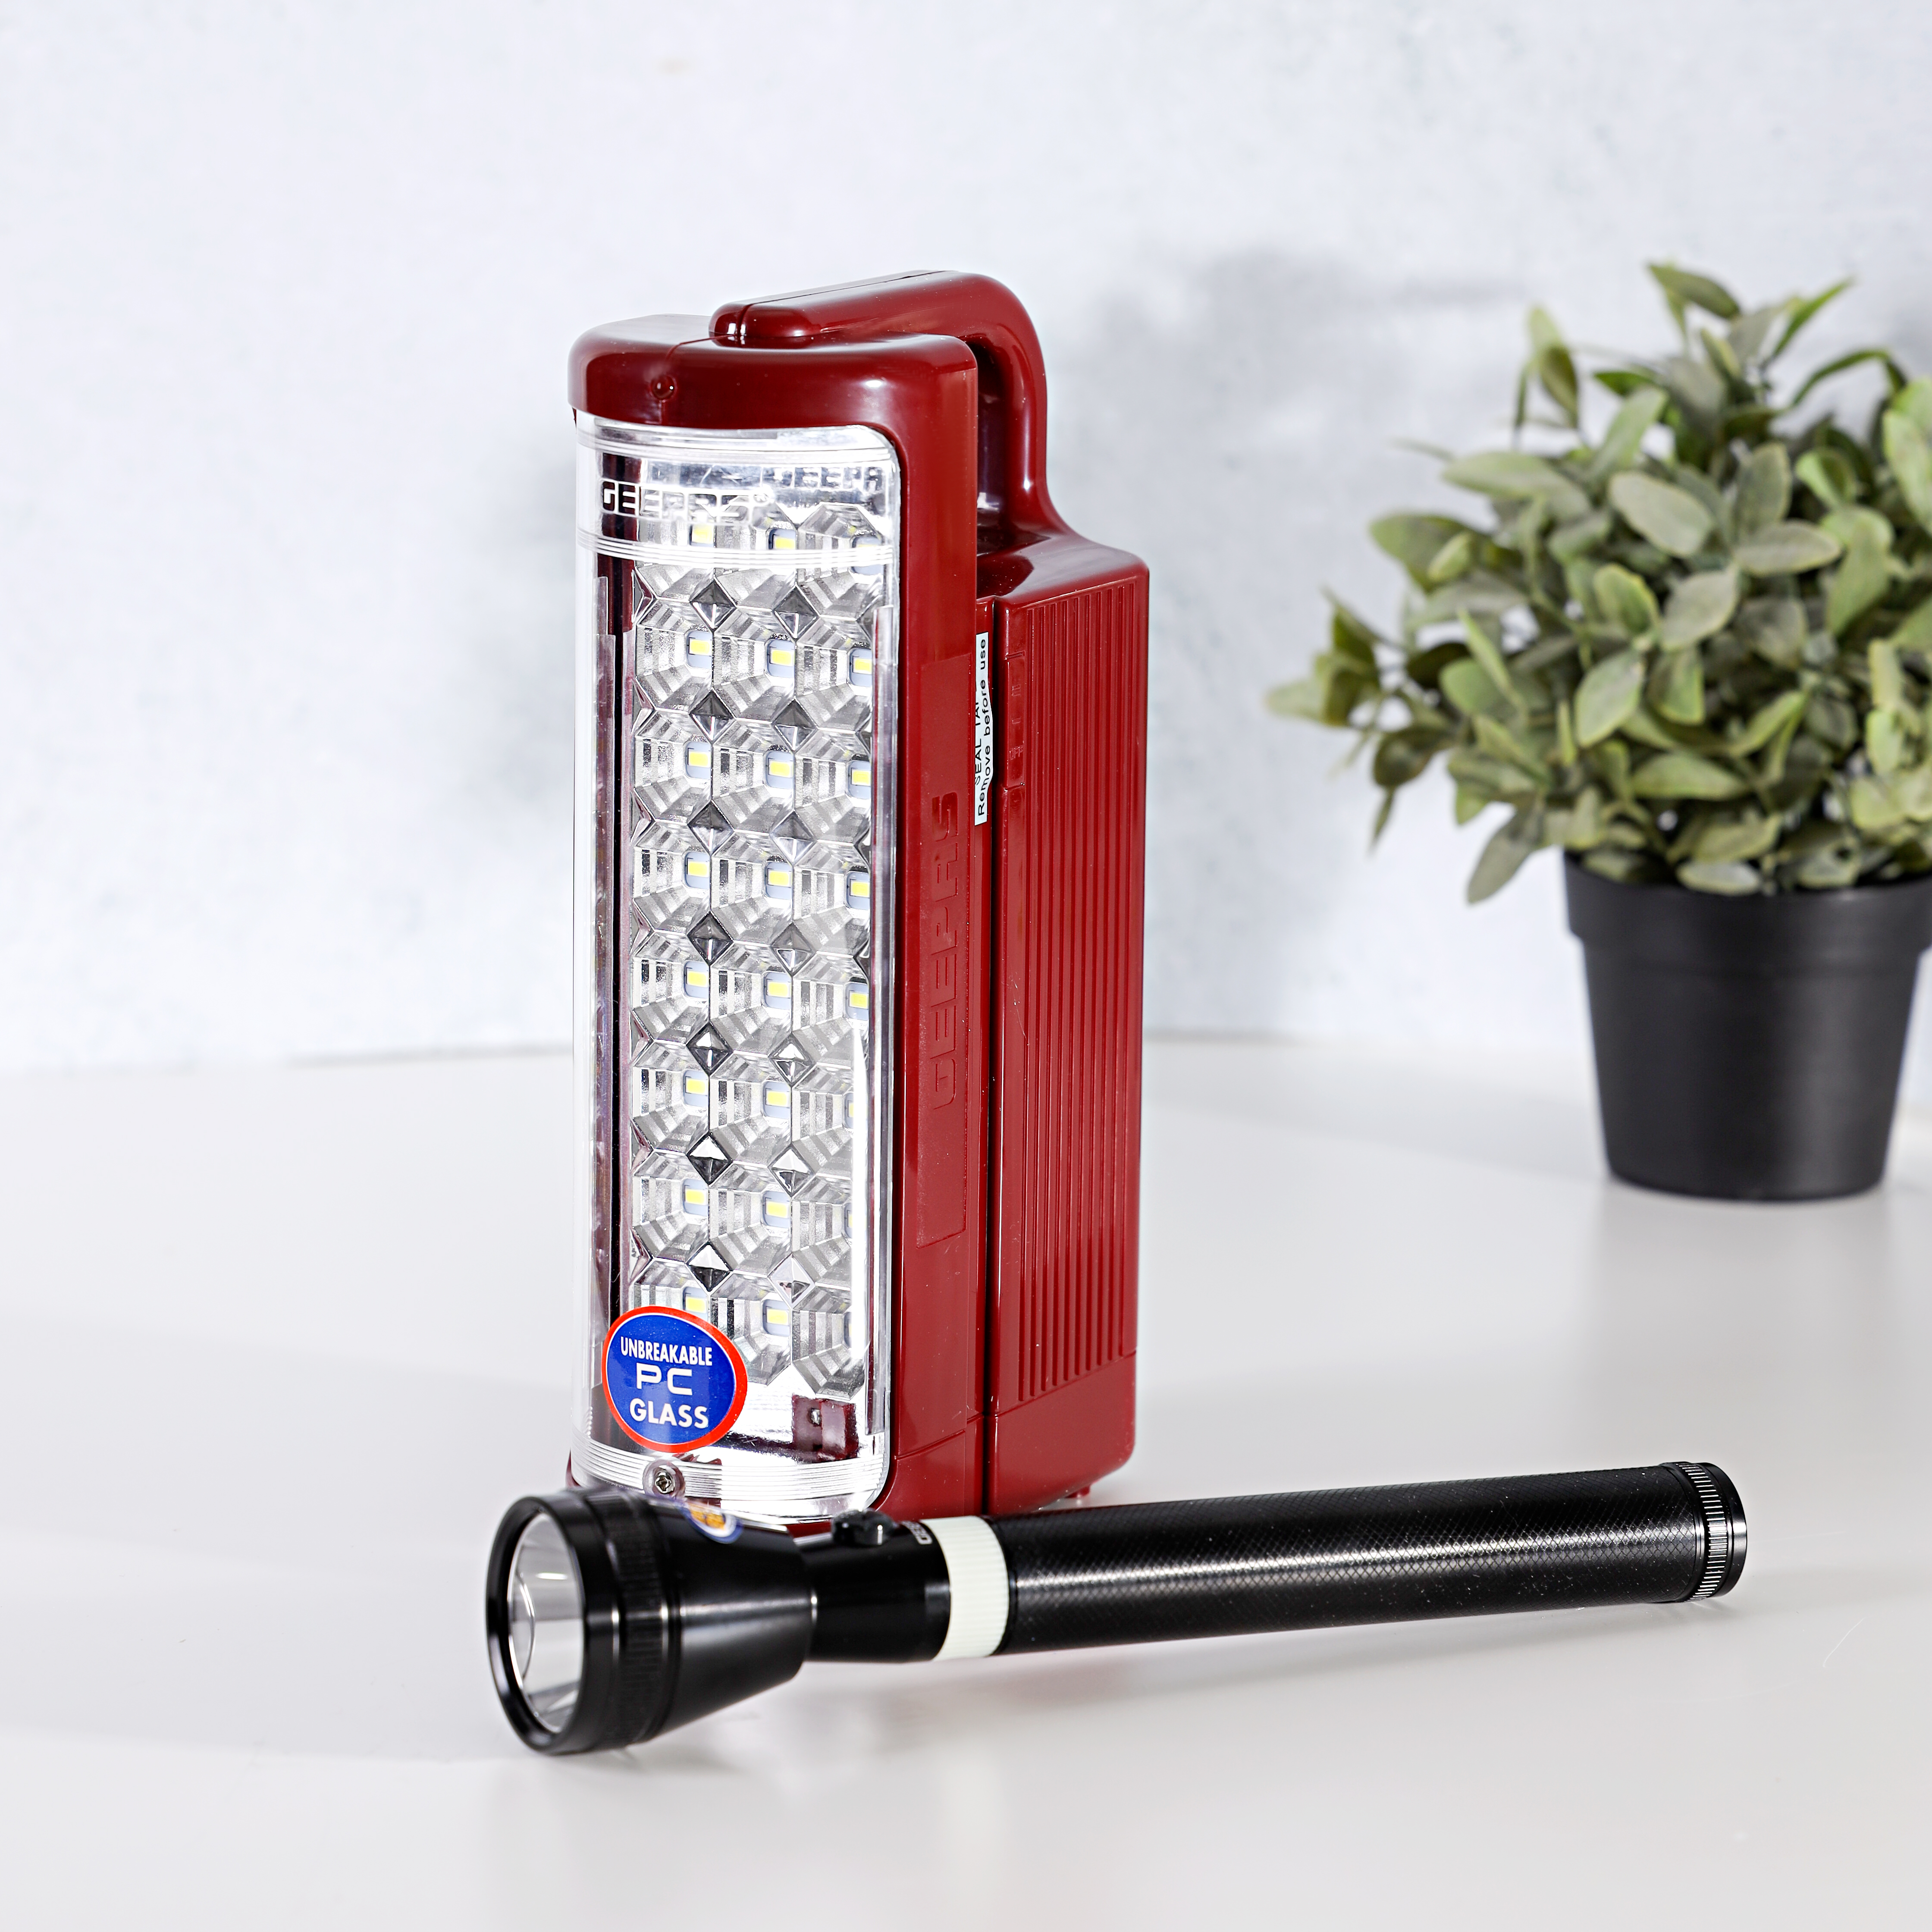 pampa Sigma 60 Hi-Bright SMD LED 360 Degree Rechargeable Charging Emergency  Lights Lantern With Adjustable Handle Lantern Emergency Light (Red) 4 hrs  Flood Lamp Emergency Light Price in India - Buy pampa Sigma 60 Hi-Bright  SMD LED 360